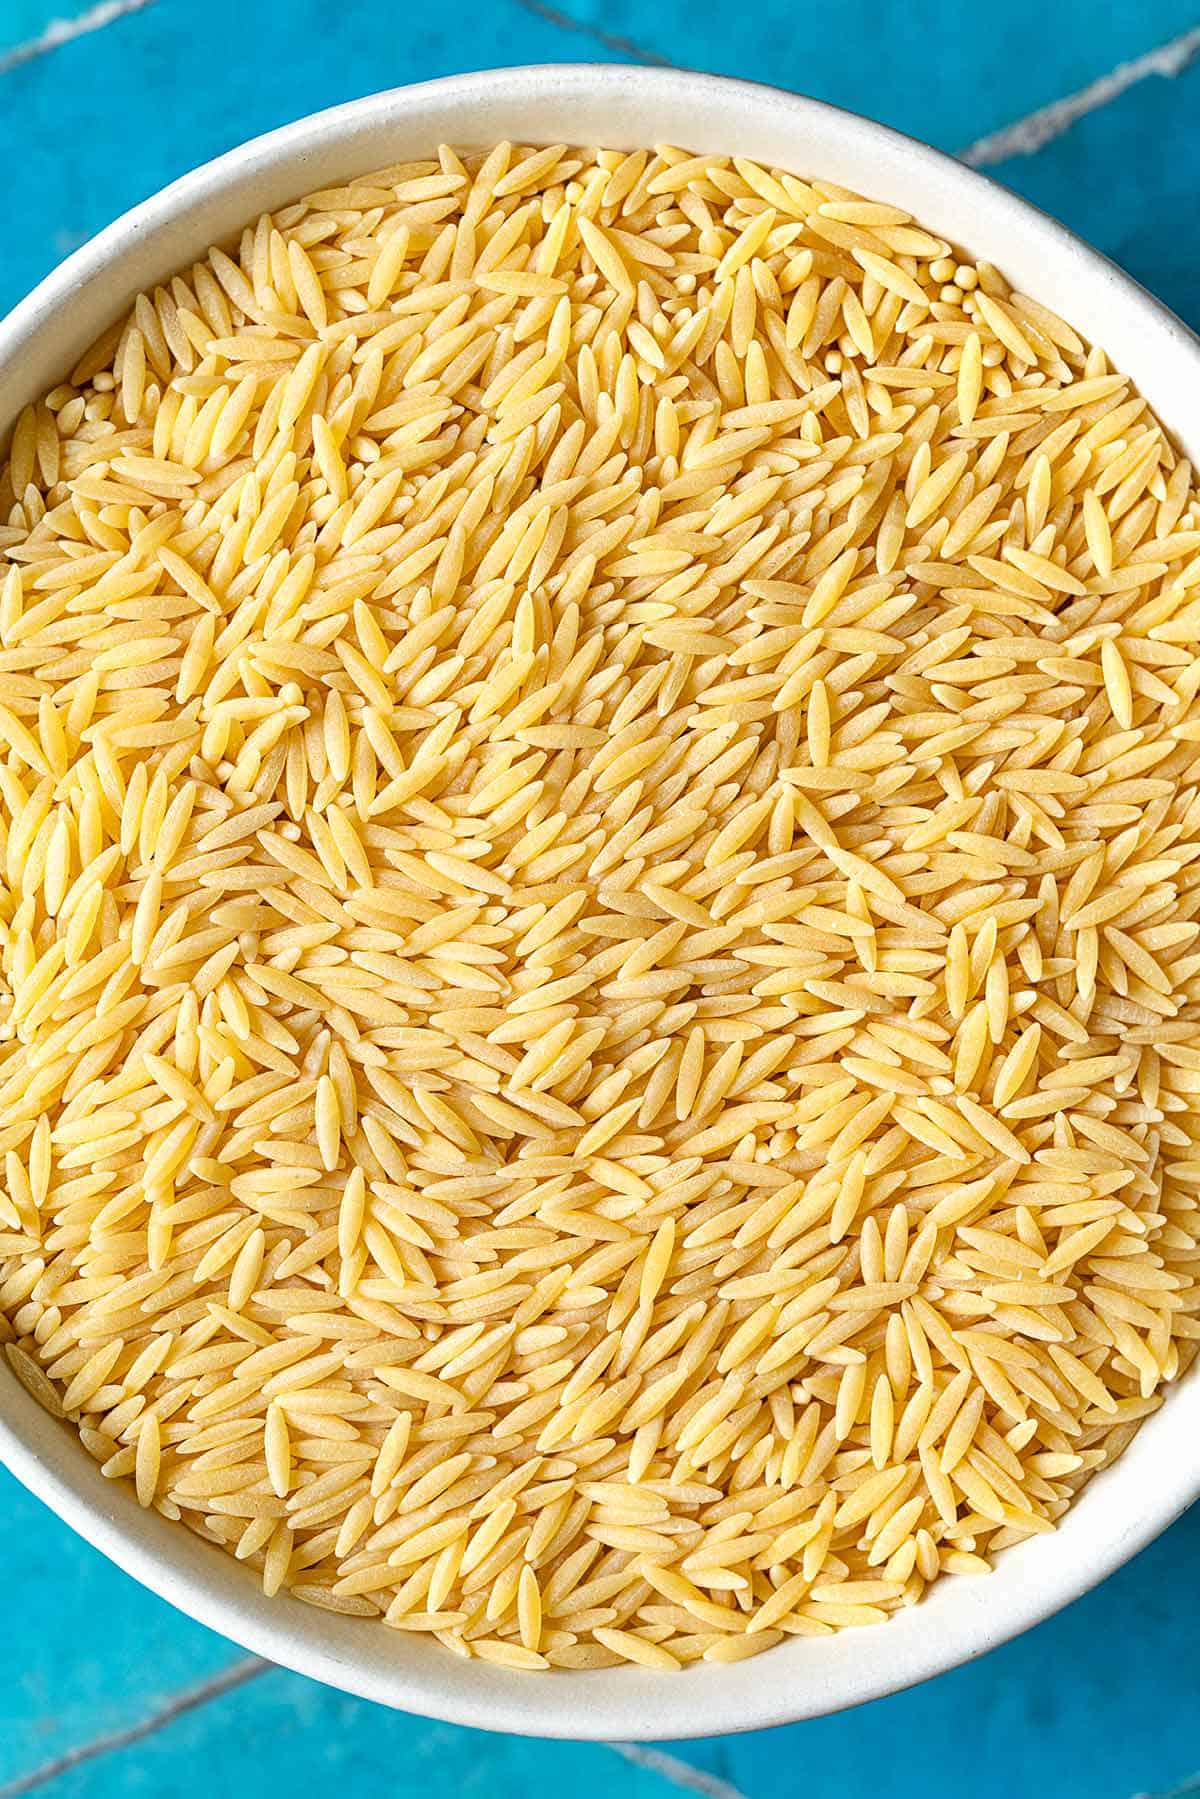 Uncooked orzo pasta in a bowl.